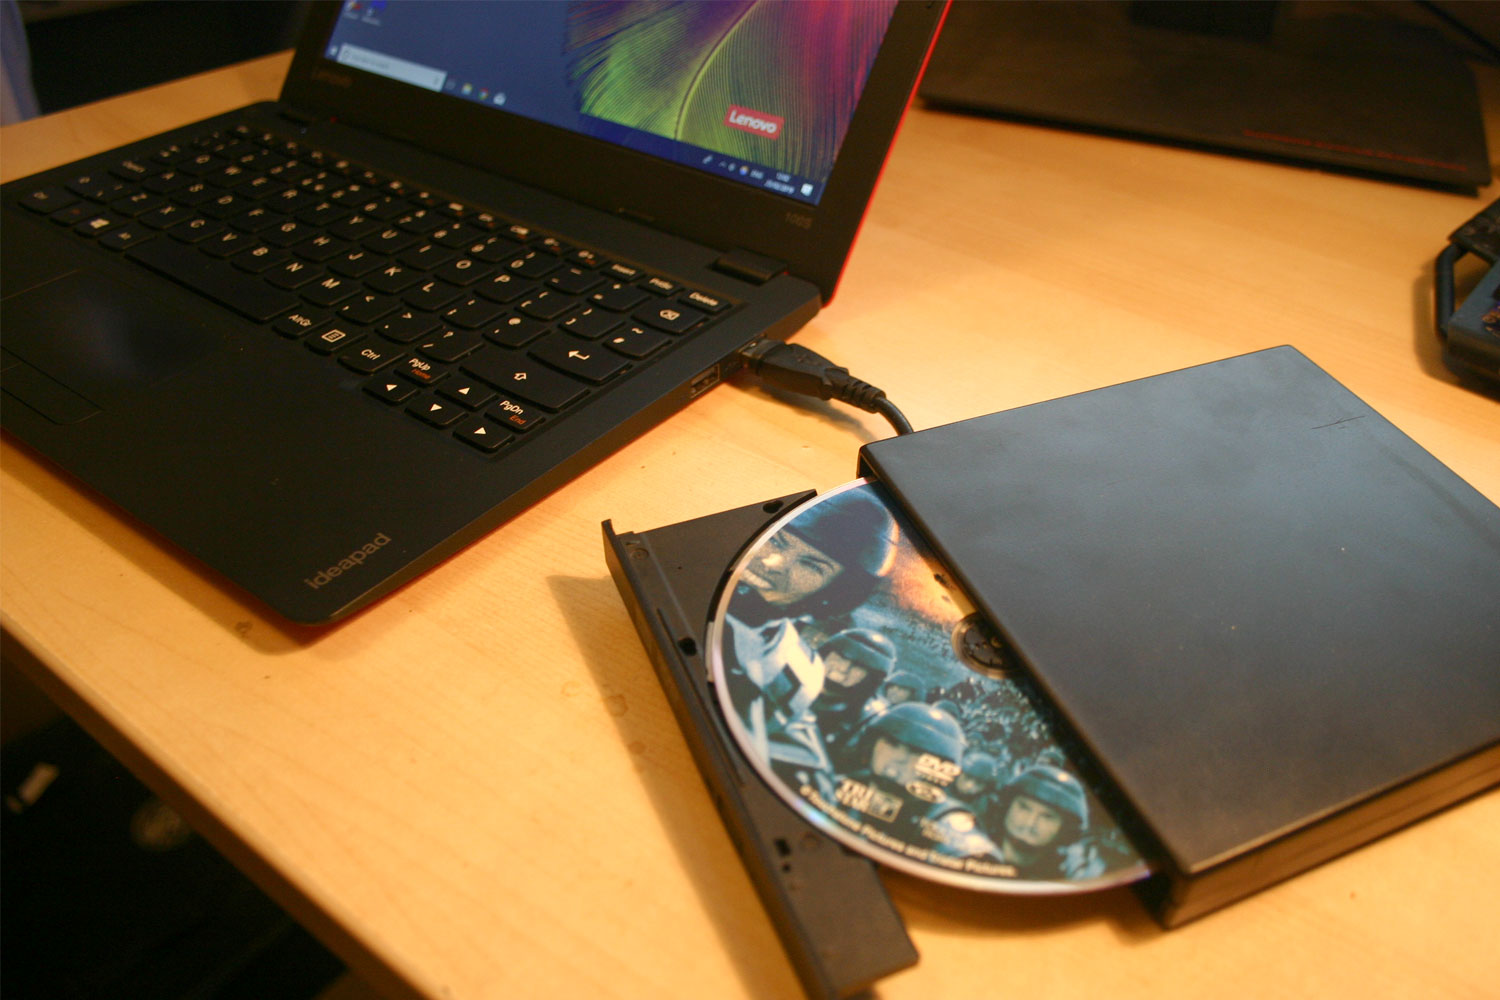 How To Watch DVD On Laptop Without DVD Player